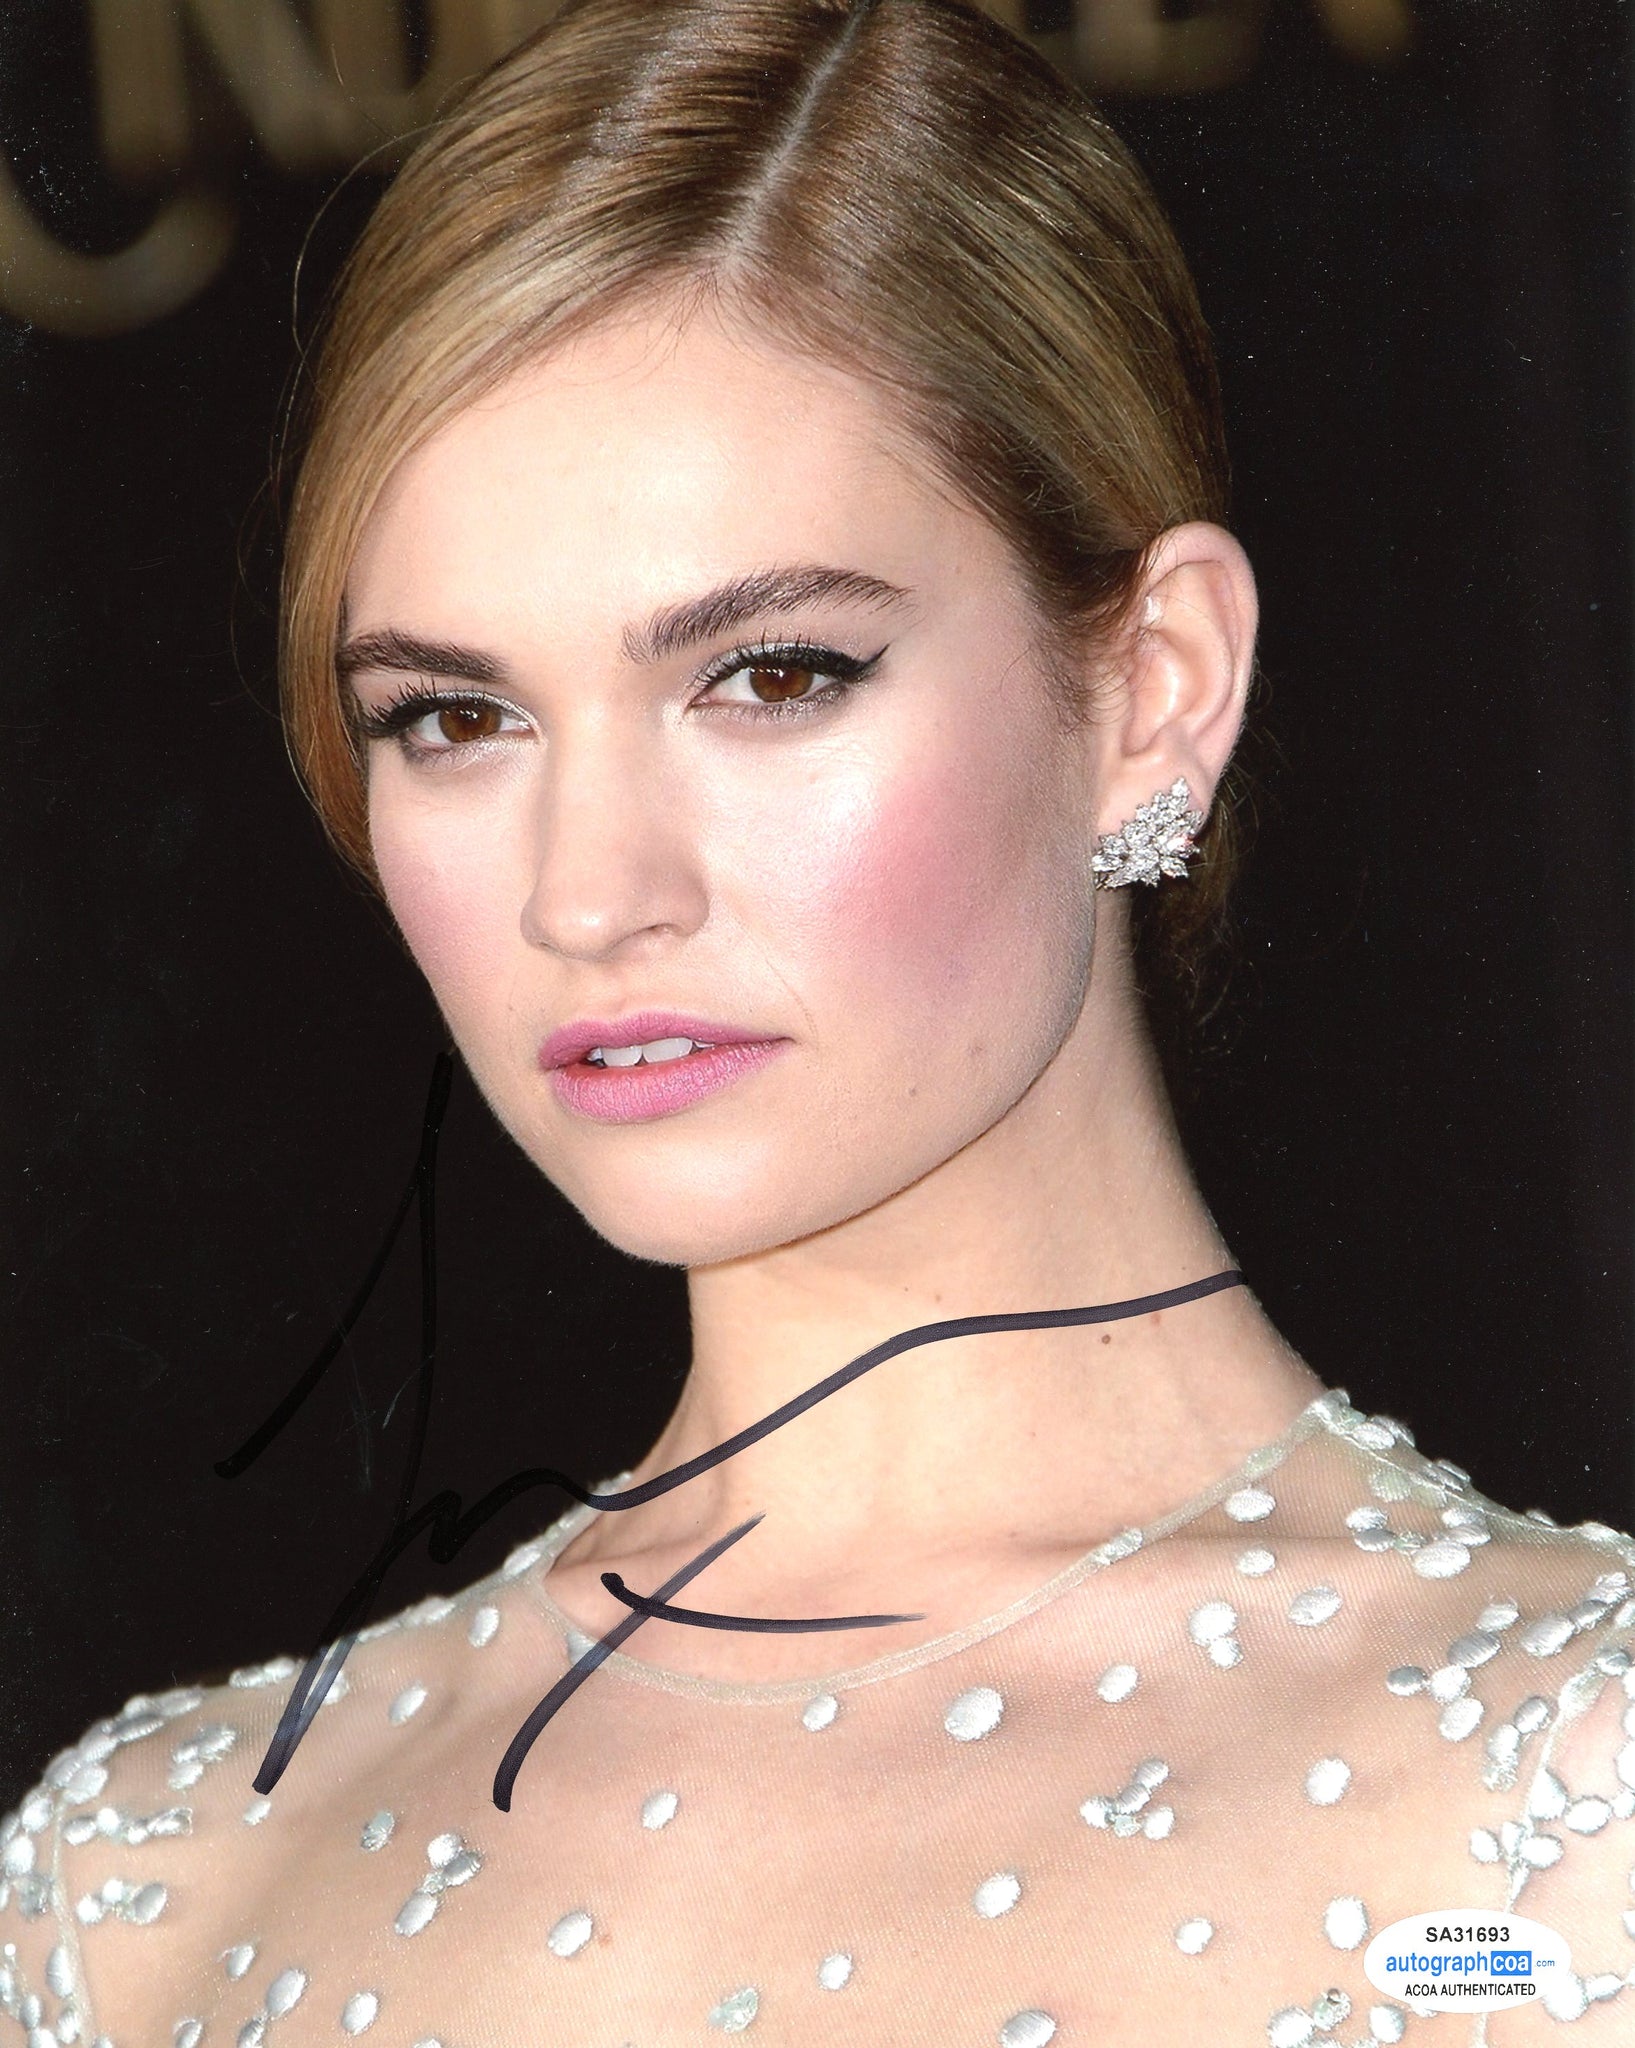 Lily James Sexy Signed Autograph 8x10 Photo ACOA #15 - Outlaw Hobbies Authentic Autographs